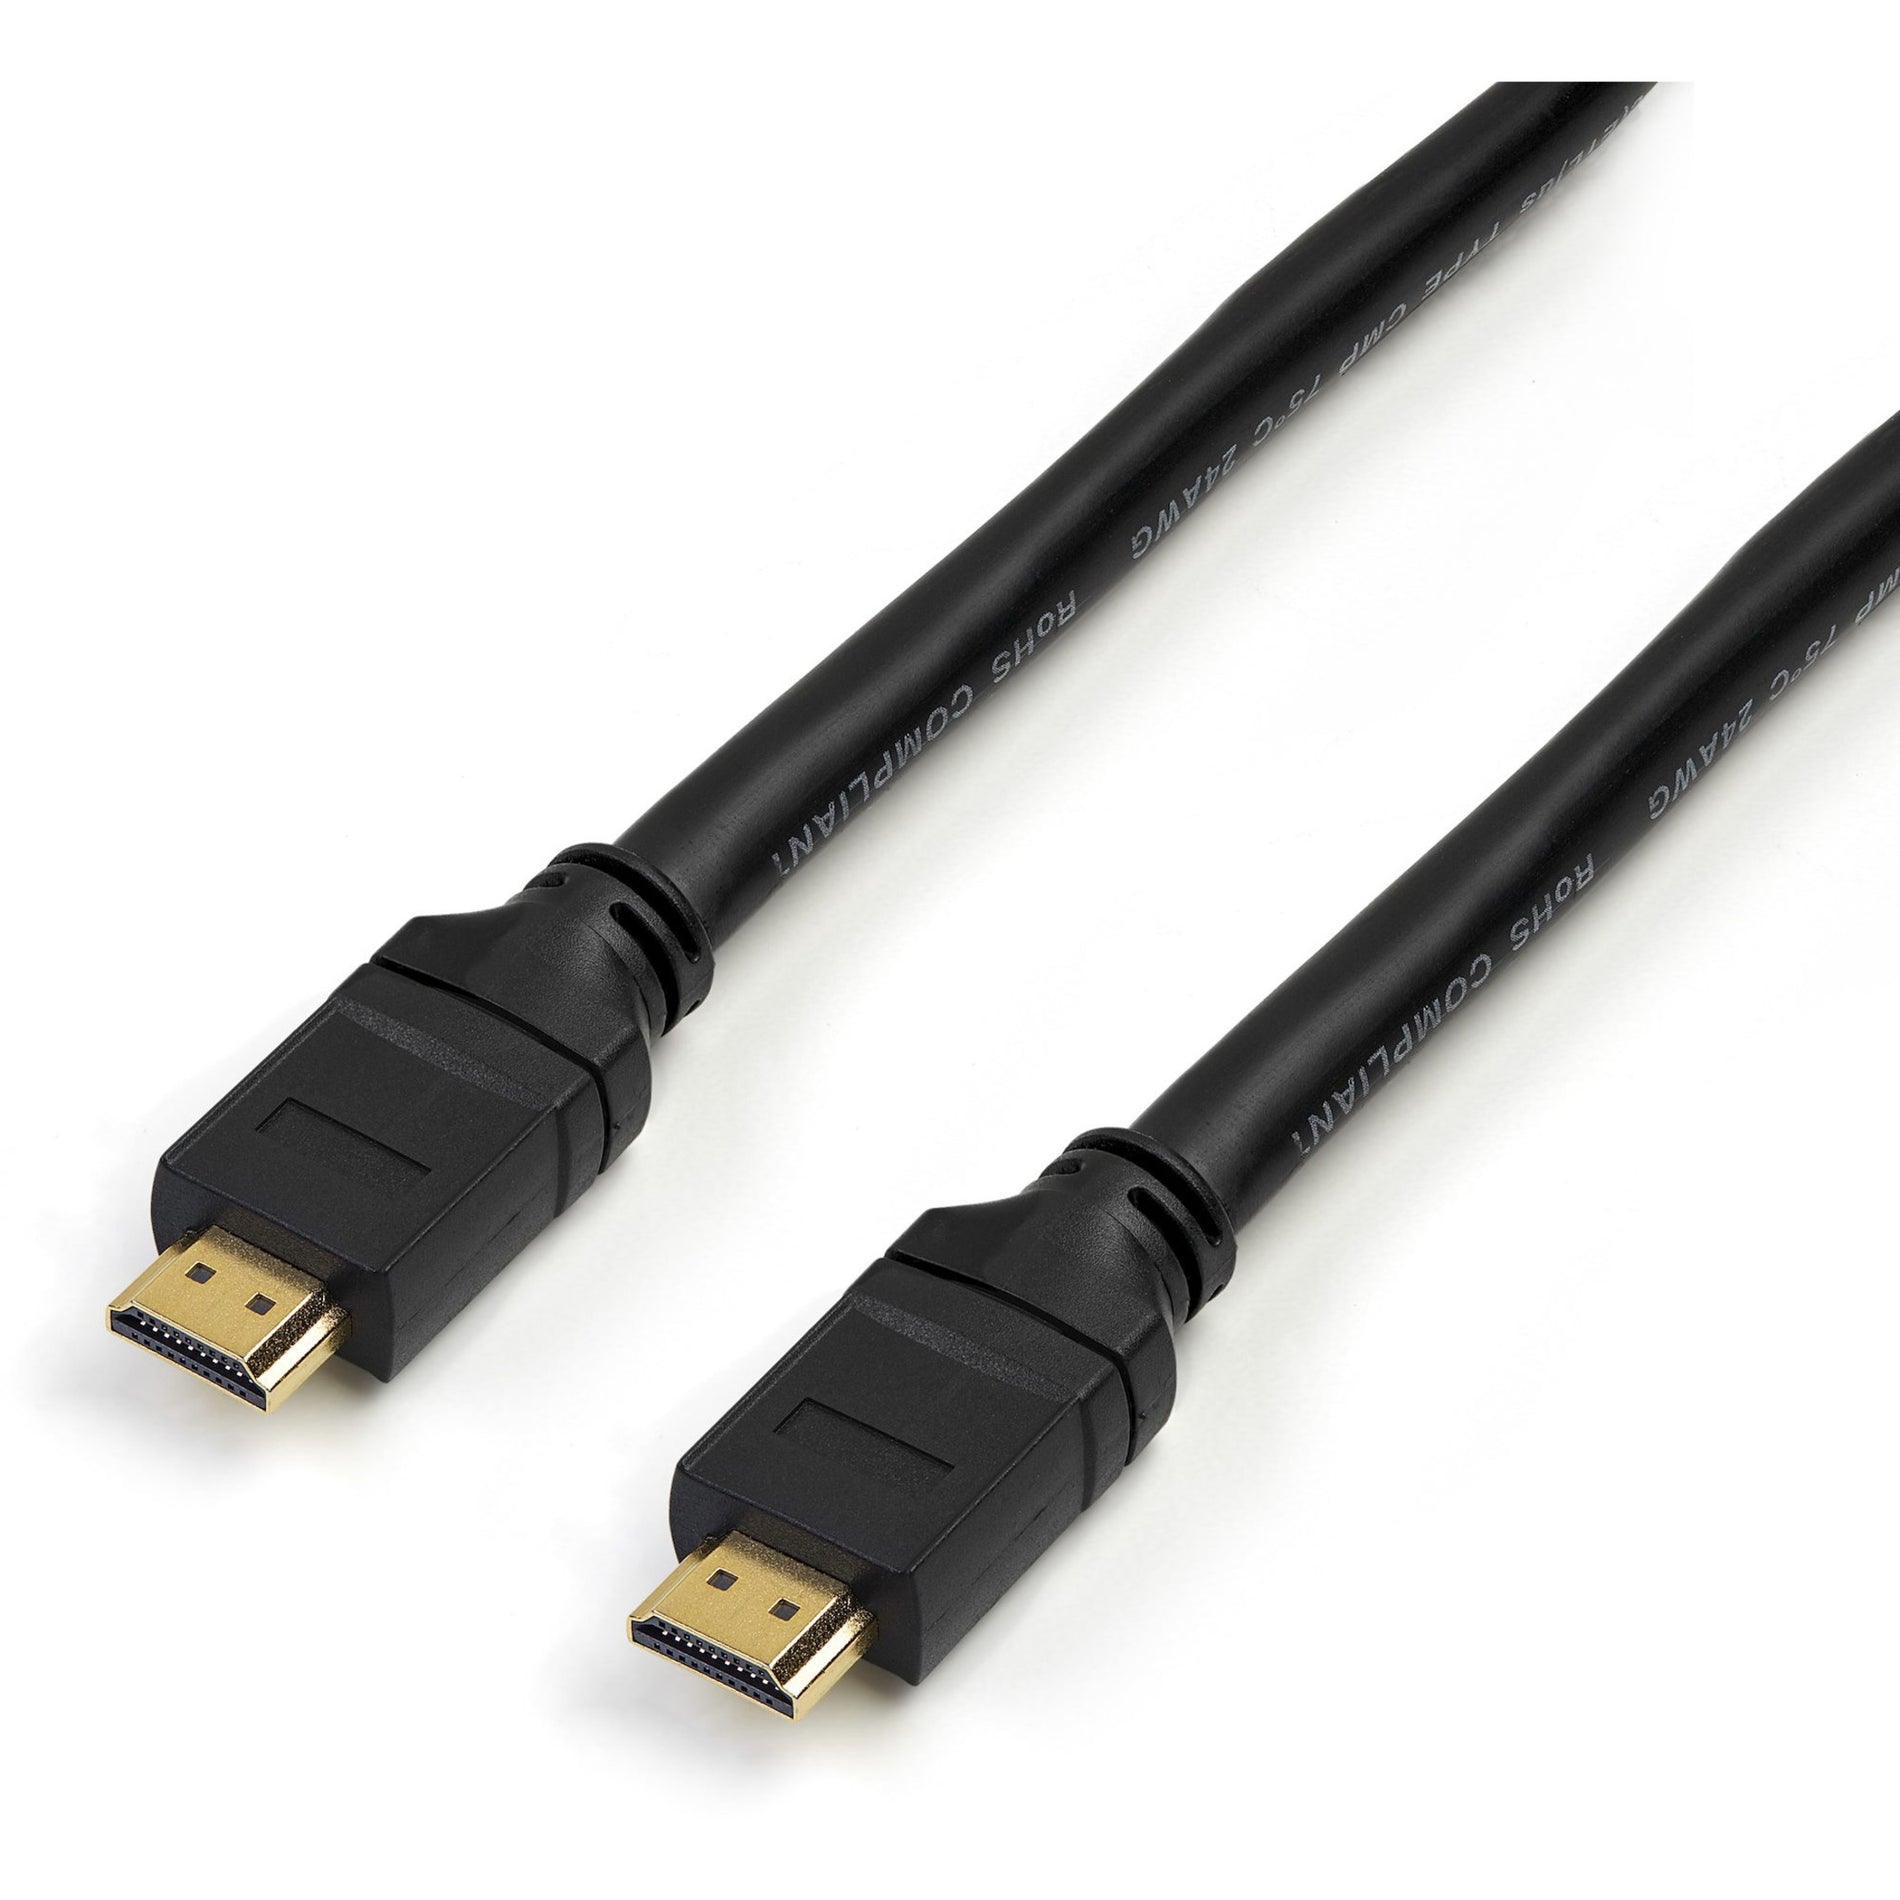 StarTech.com HDPMM35 35 ft 10m Plenum-Rated High Speed HDMI Cable - HDMI to HDMI - M/M, Corrosion-free, EMI Protection, Strain Relief